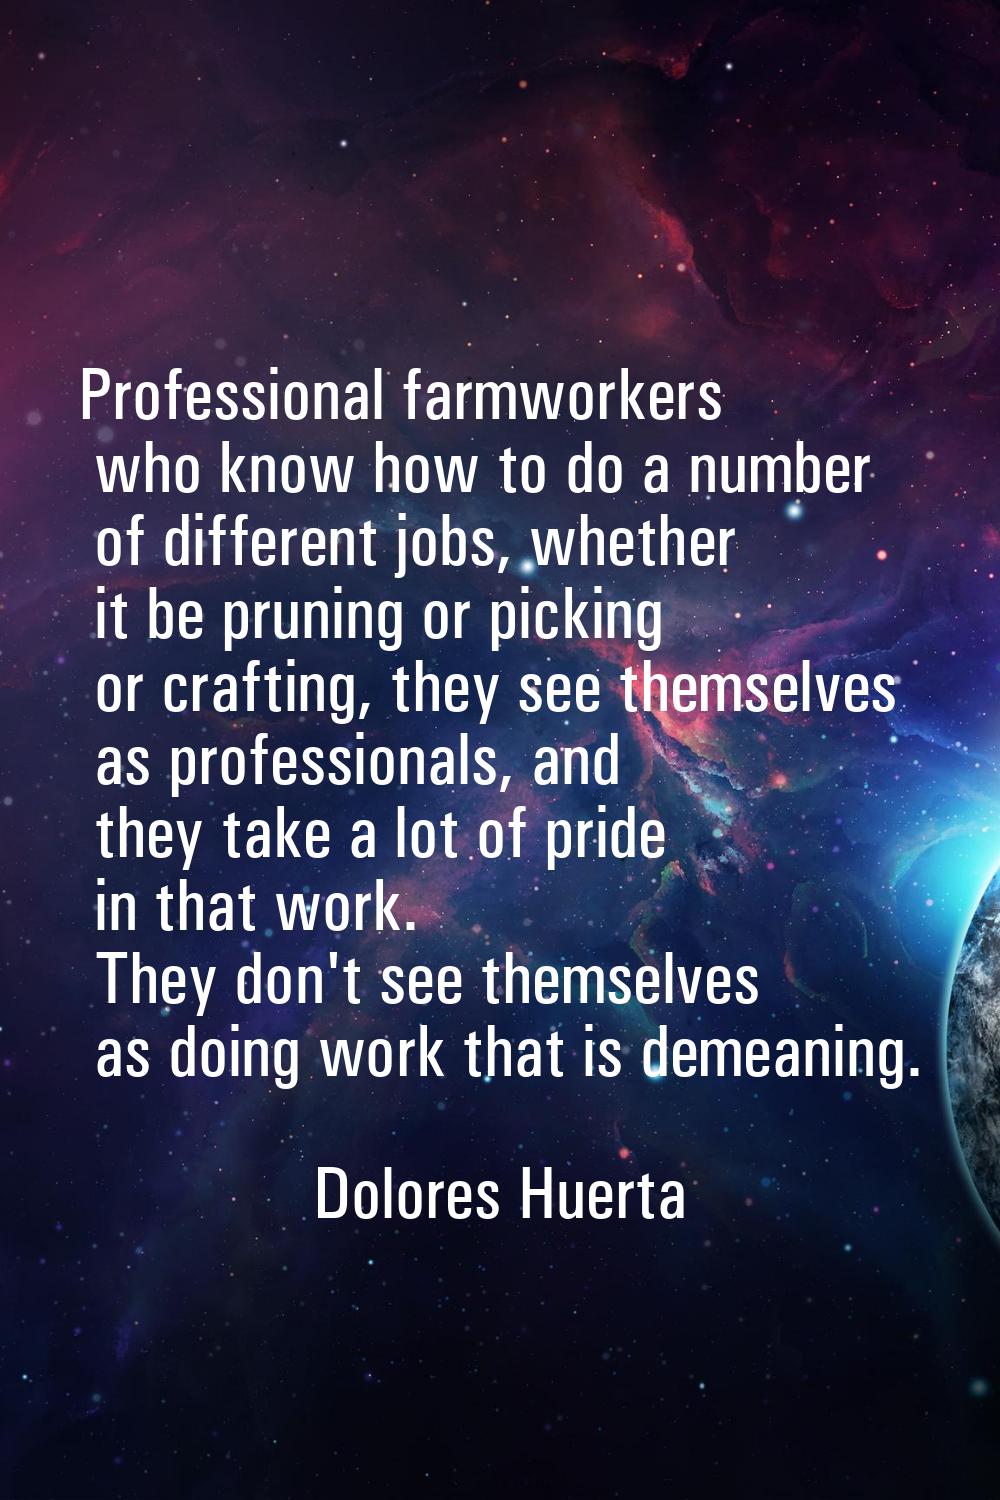 Professional farmworkers who know how to do a number of different jobs, whether it be pruning or pi